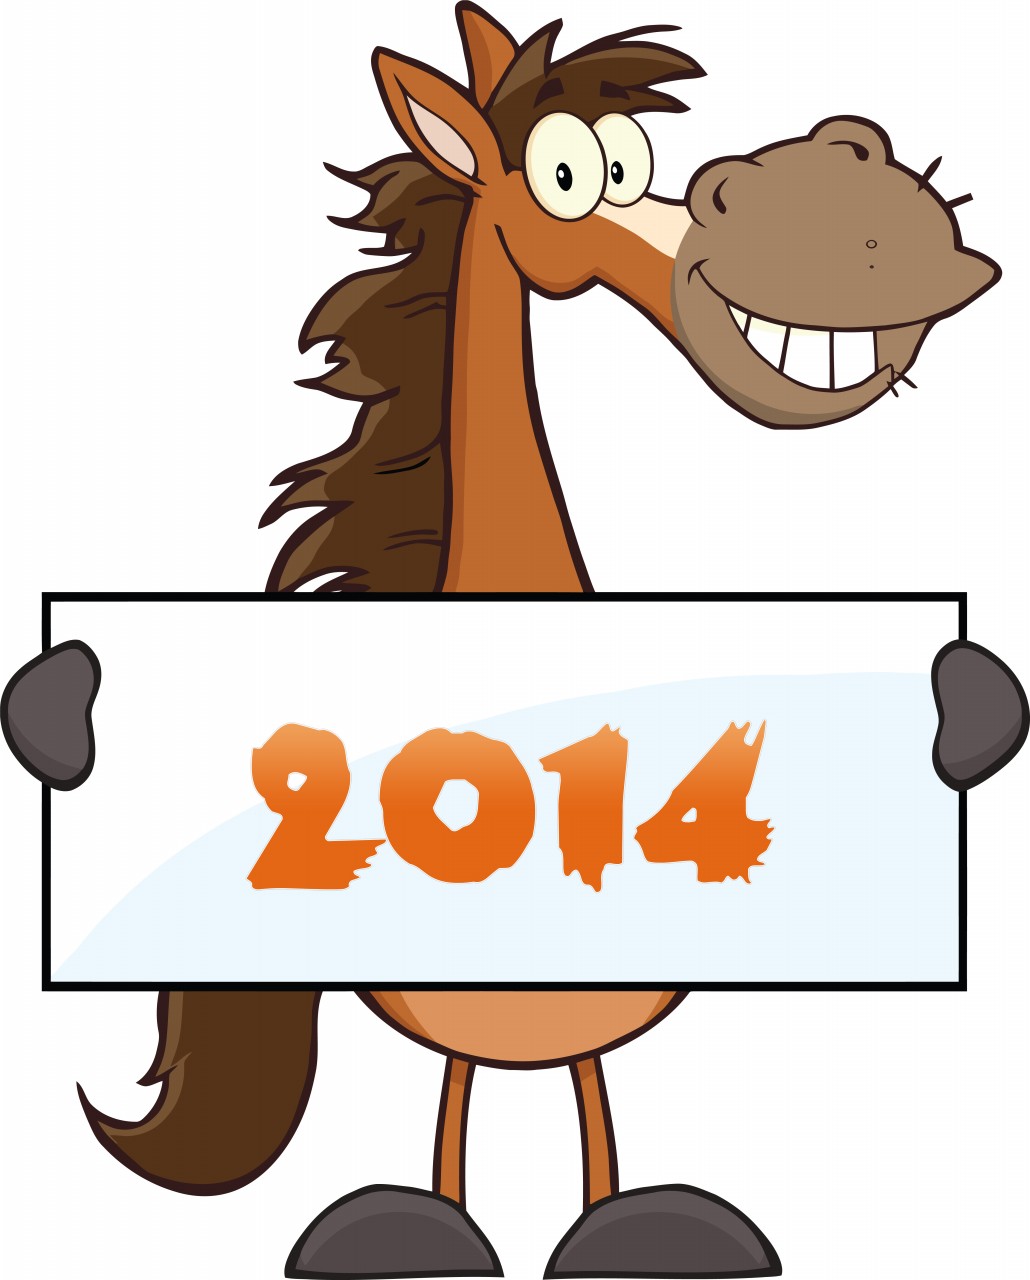 Funny Horses With 2014 Banners   Happy New Year